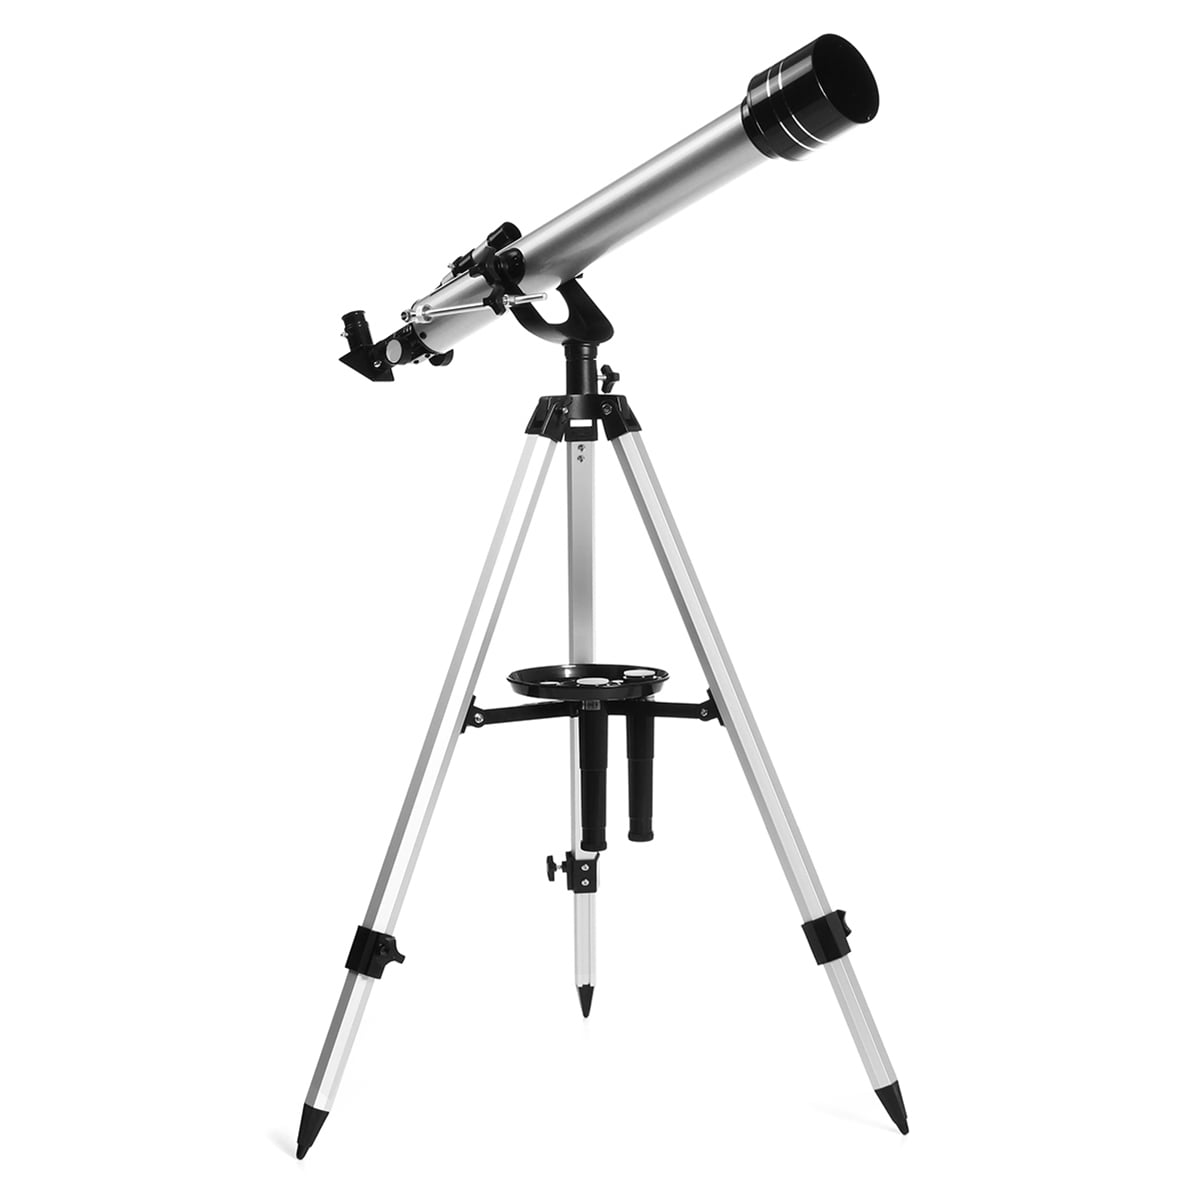 70mm Aperture Refractor Telescope Kids and Astronomy Beginners Color : A Travel Scope with Super Lightweight Tripod yppss Portable Telescope 